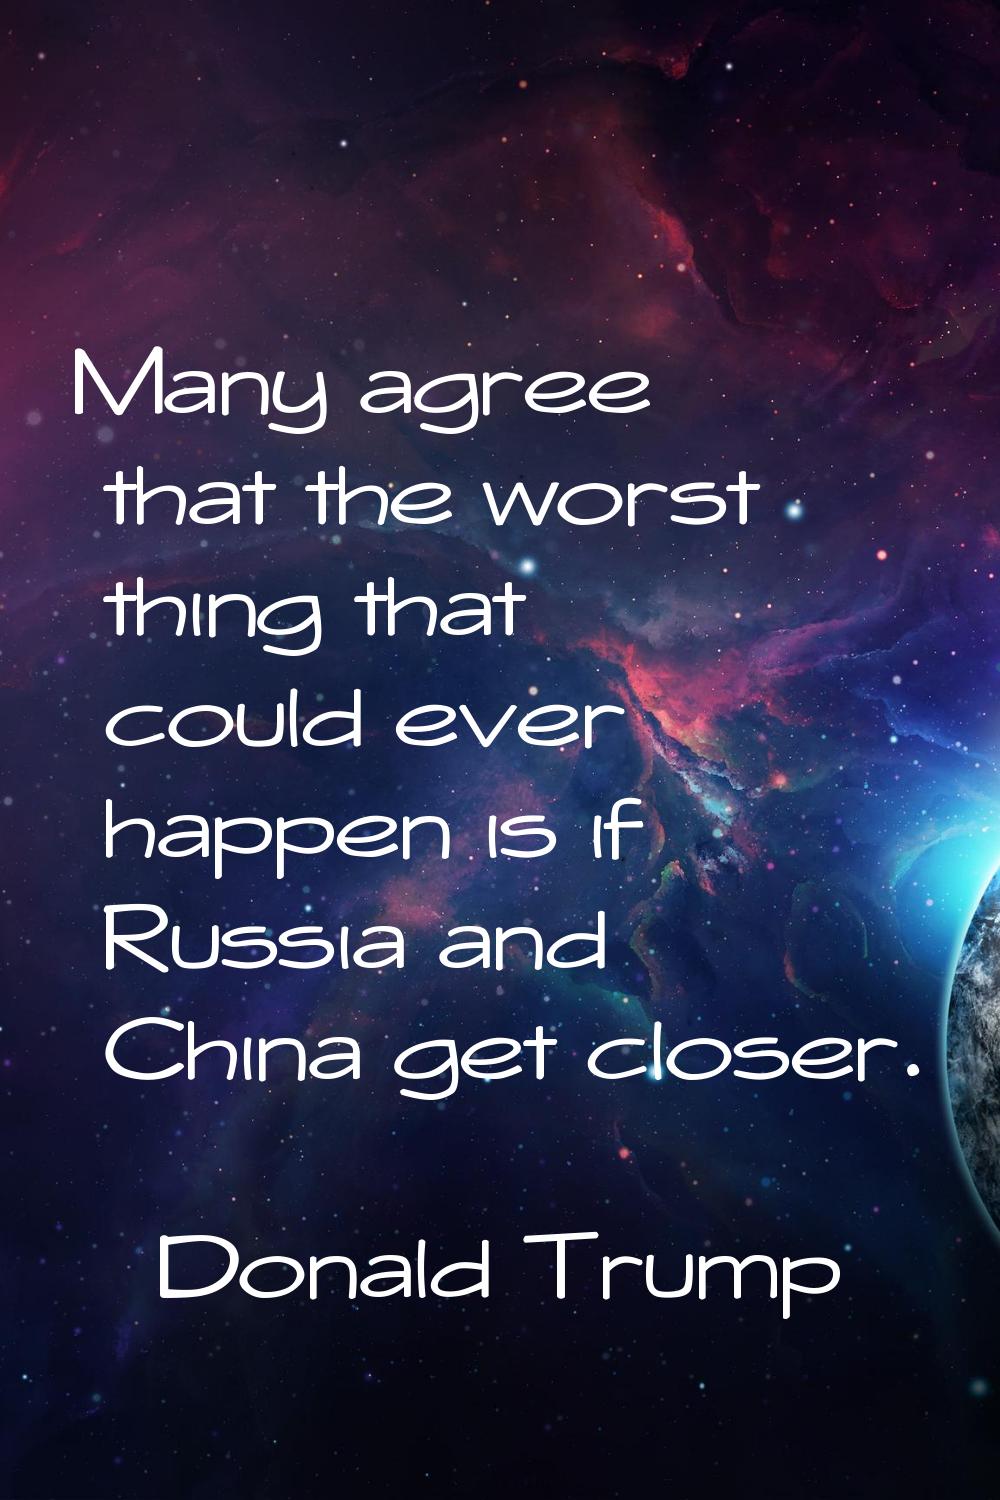 Many agree that the worst thing that could ever happen is if Russia and China get closer.